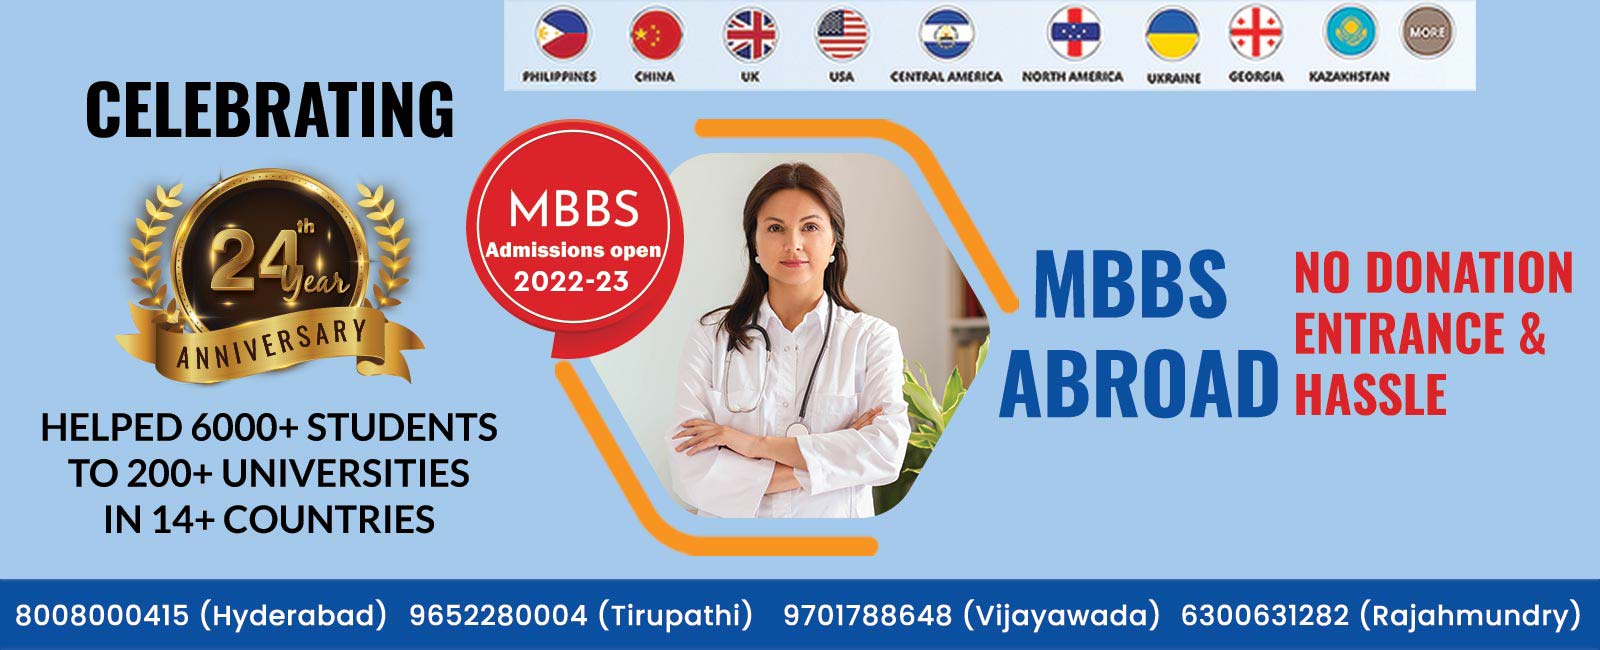 MBBS in Philippines